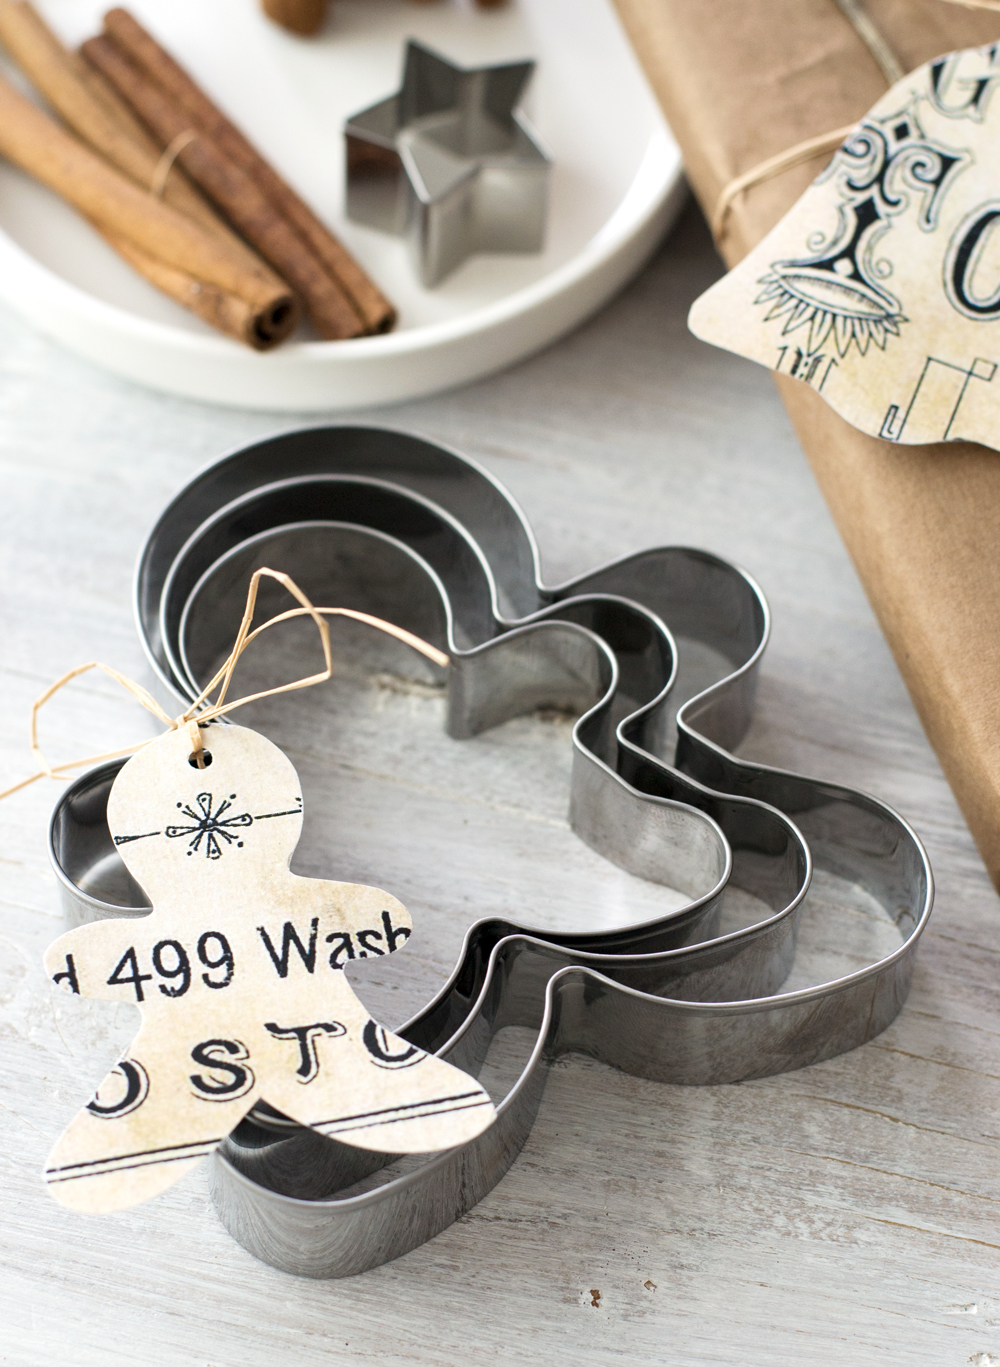 Cookie cutters with holiday tags